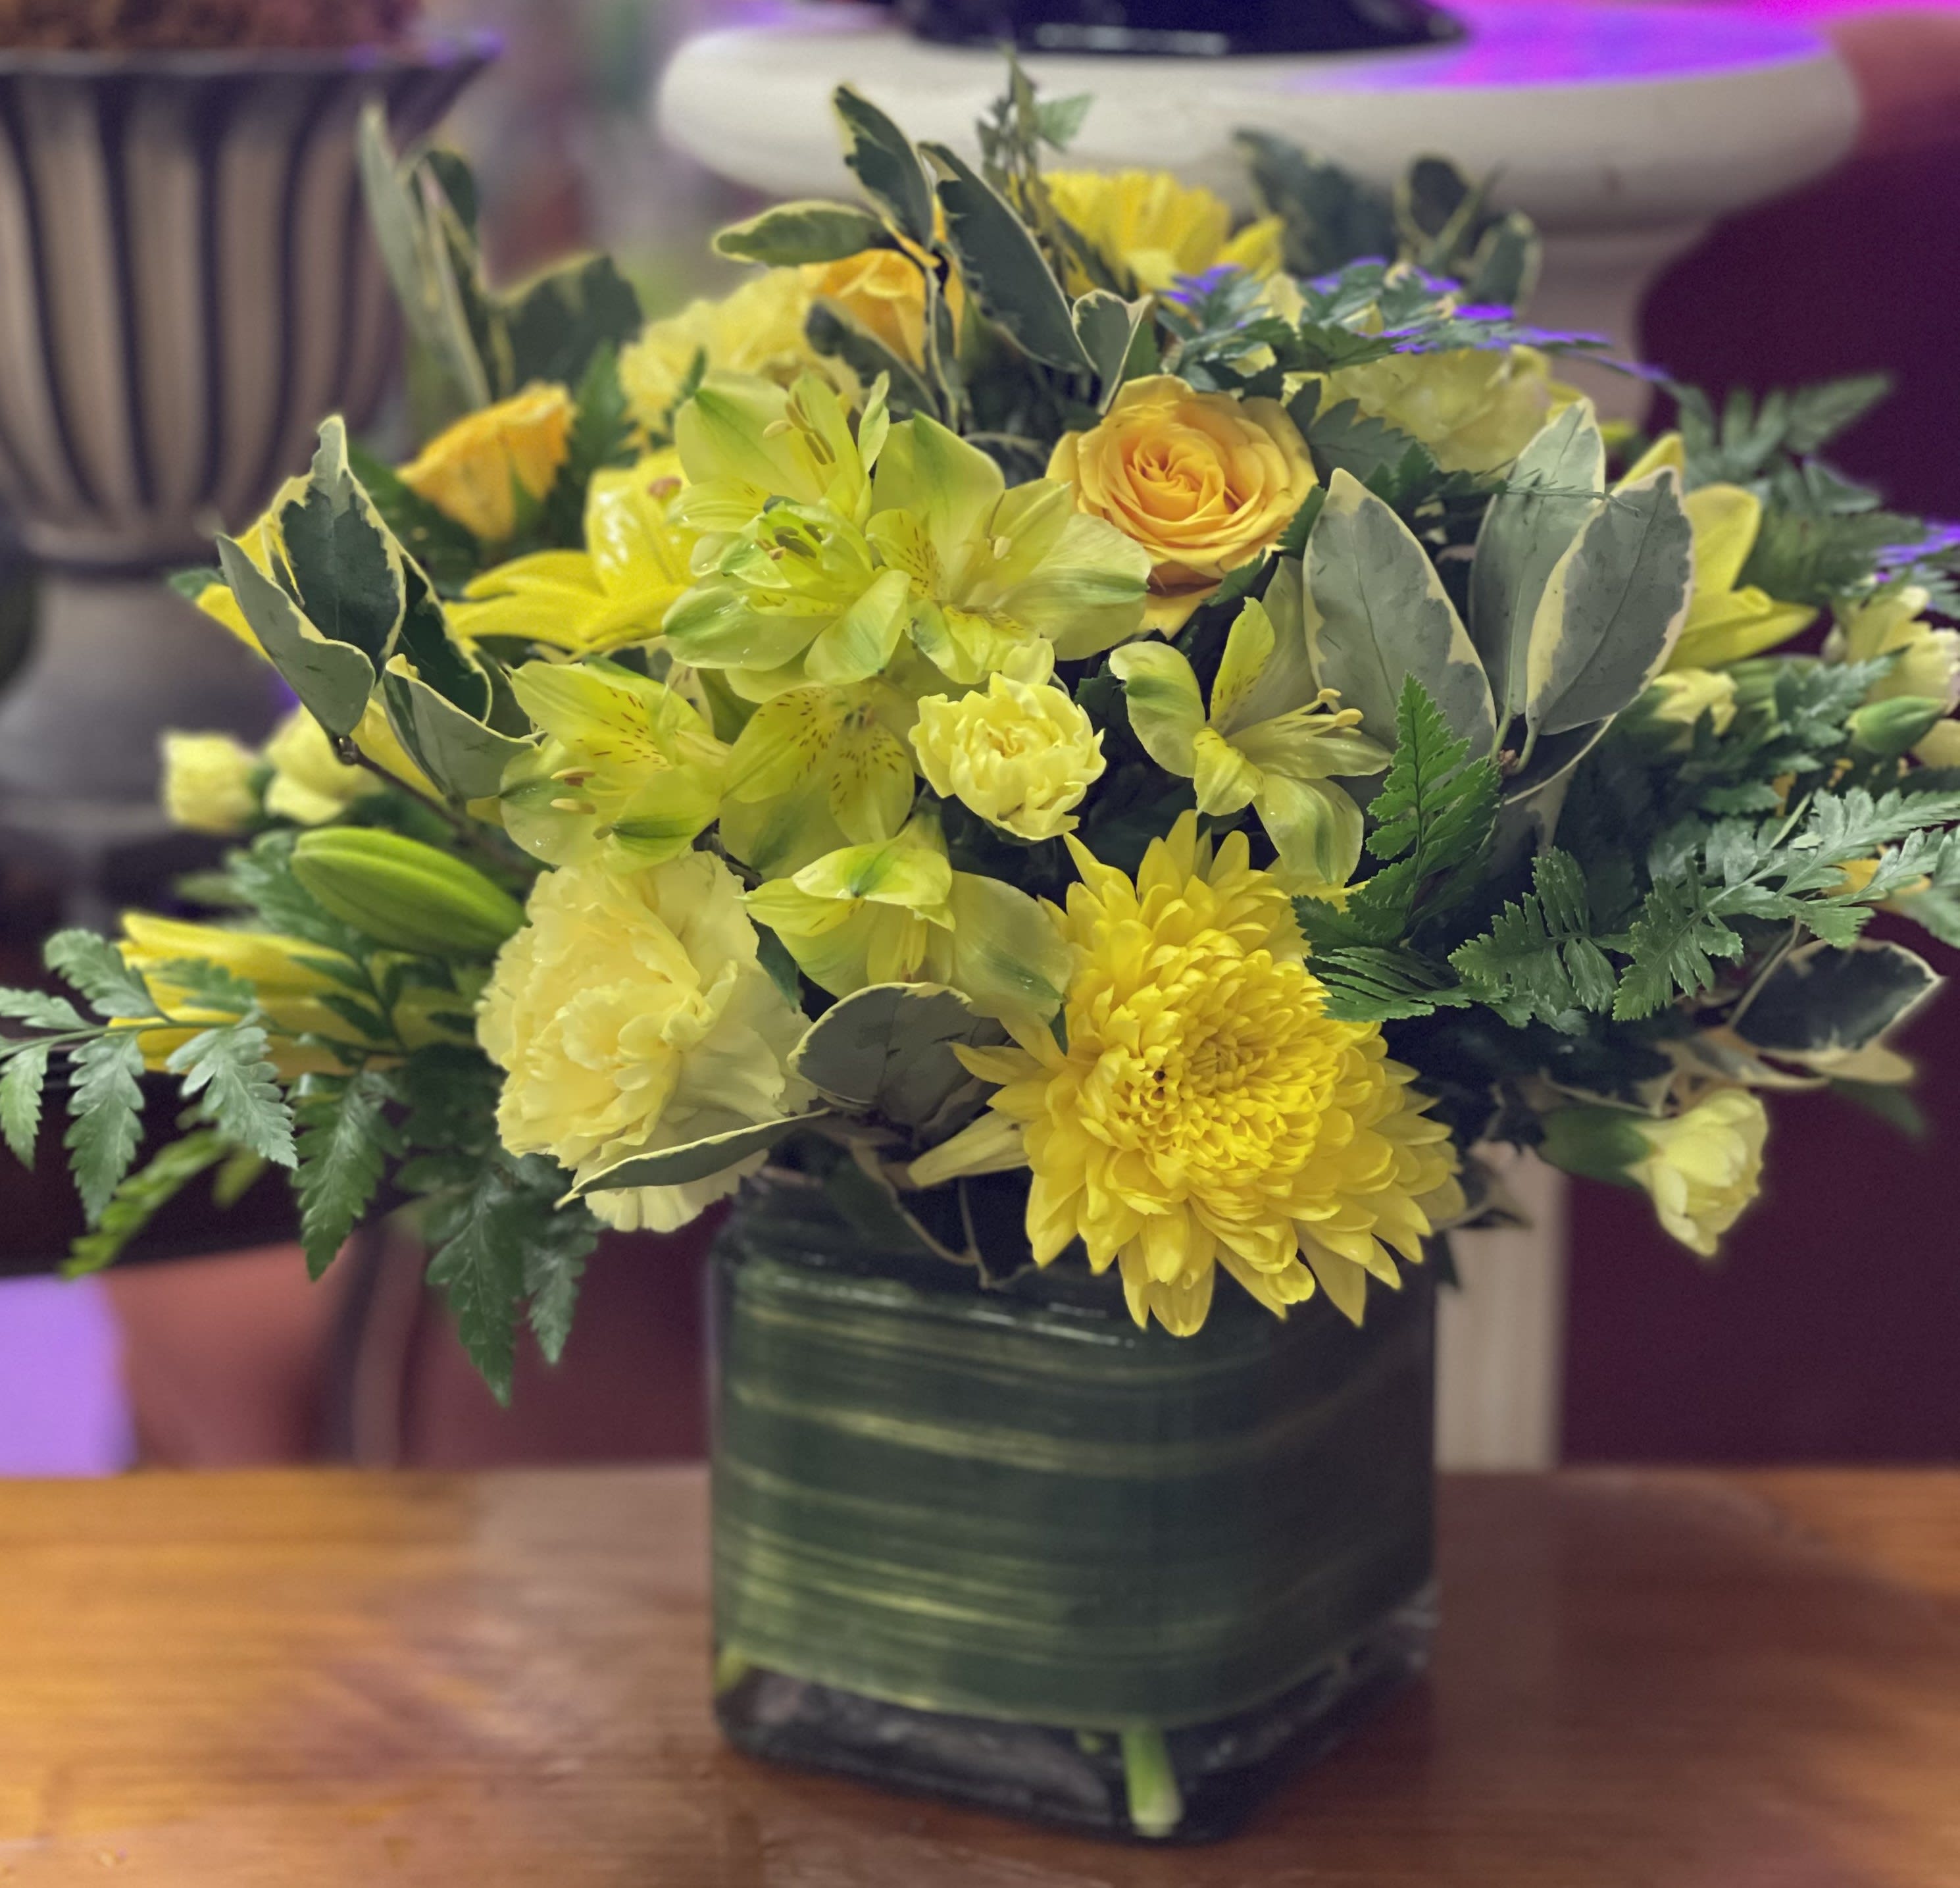 Sunshine - Need a little sunshine in your life?  We have the perfect little bouquet of posies for you!